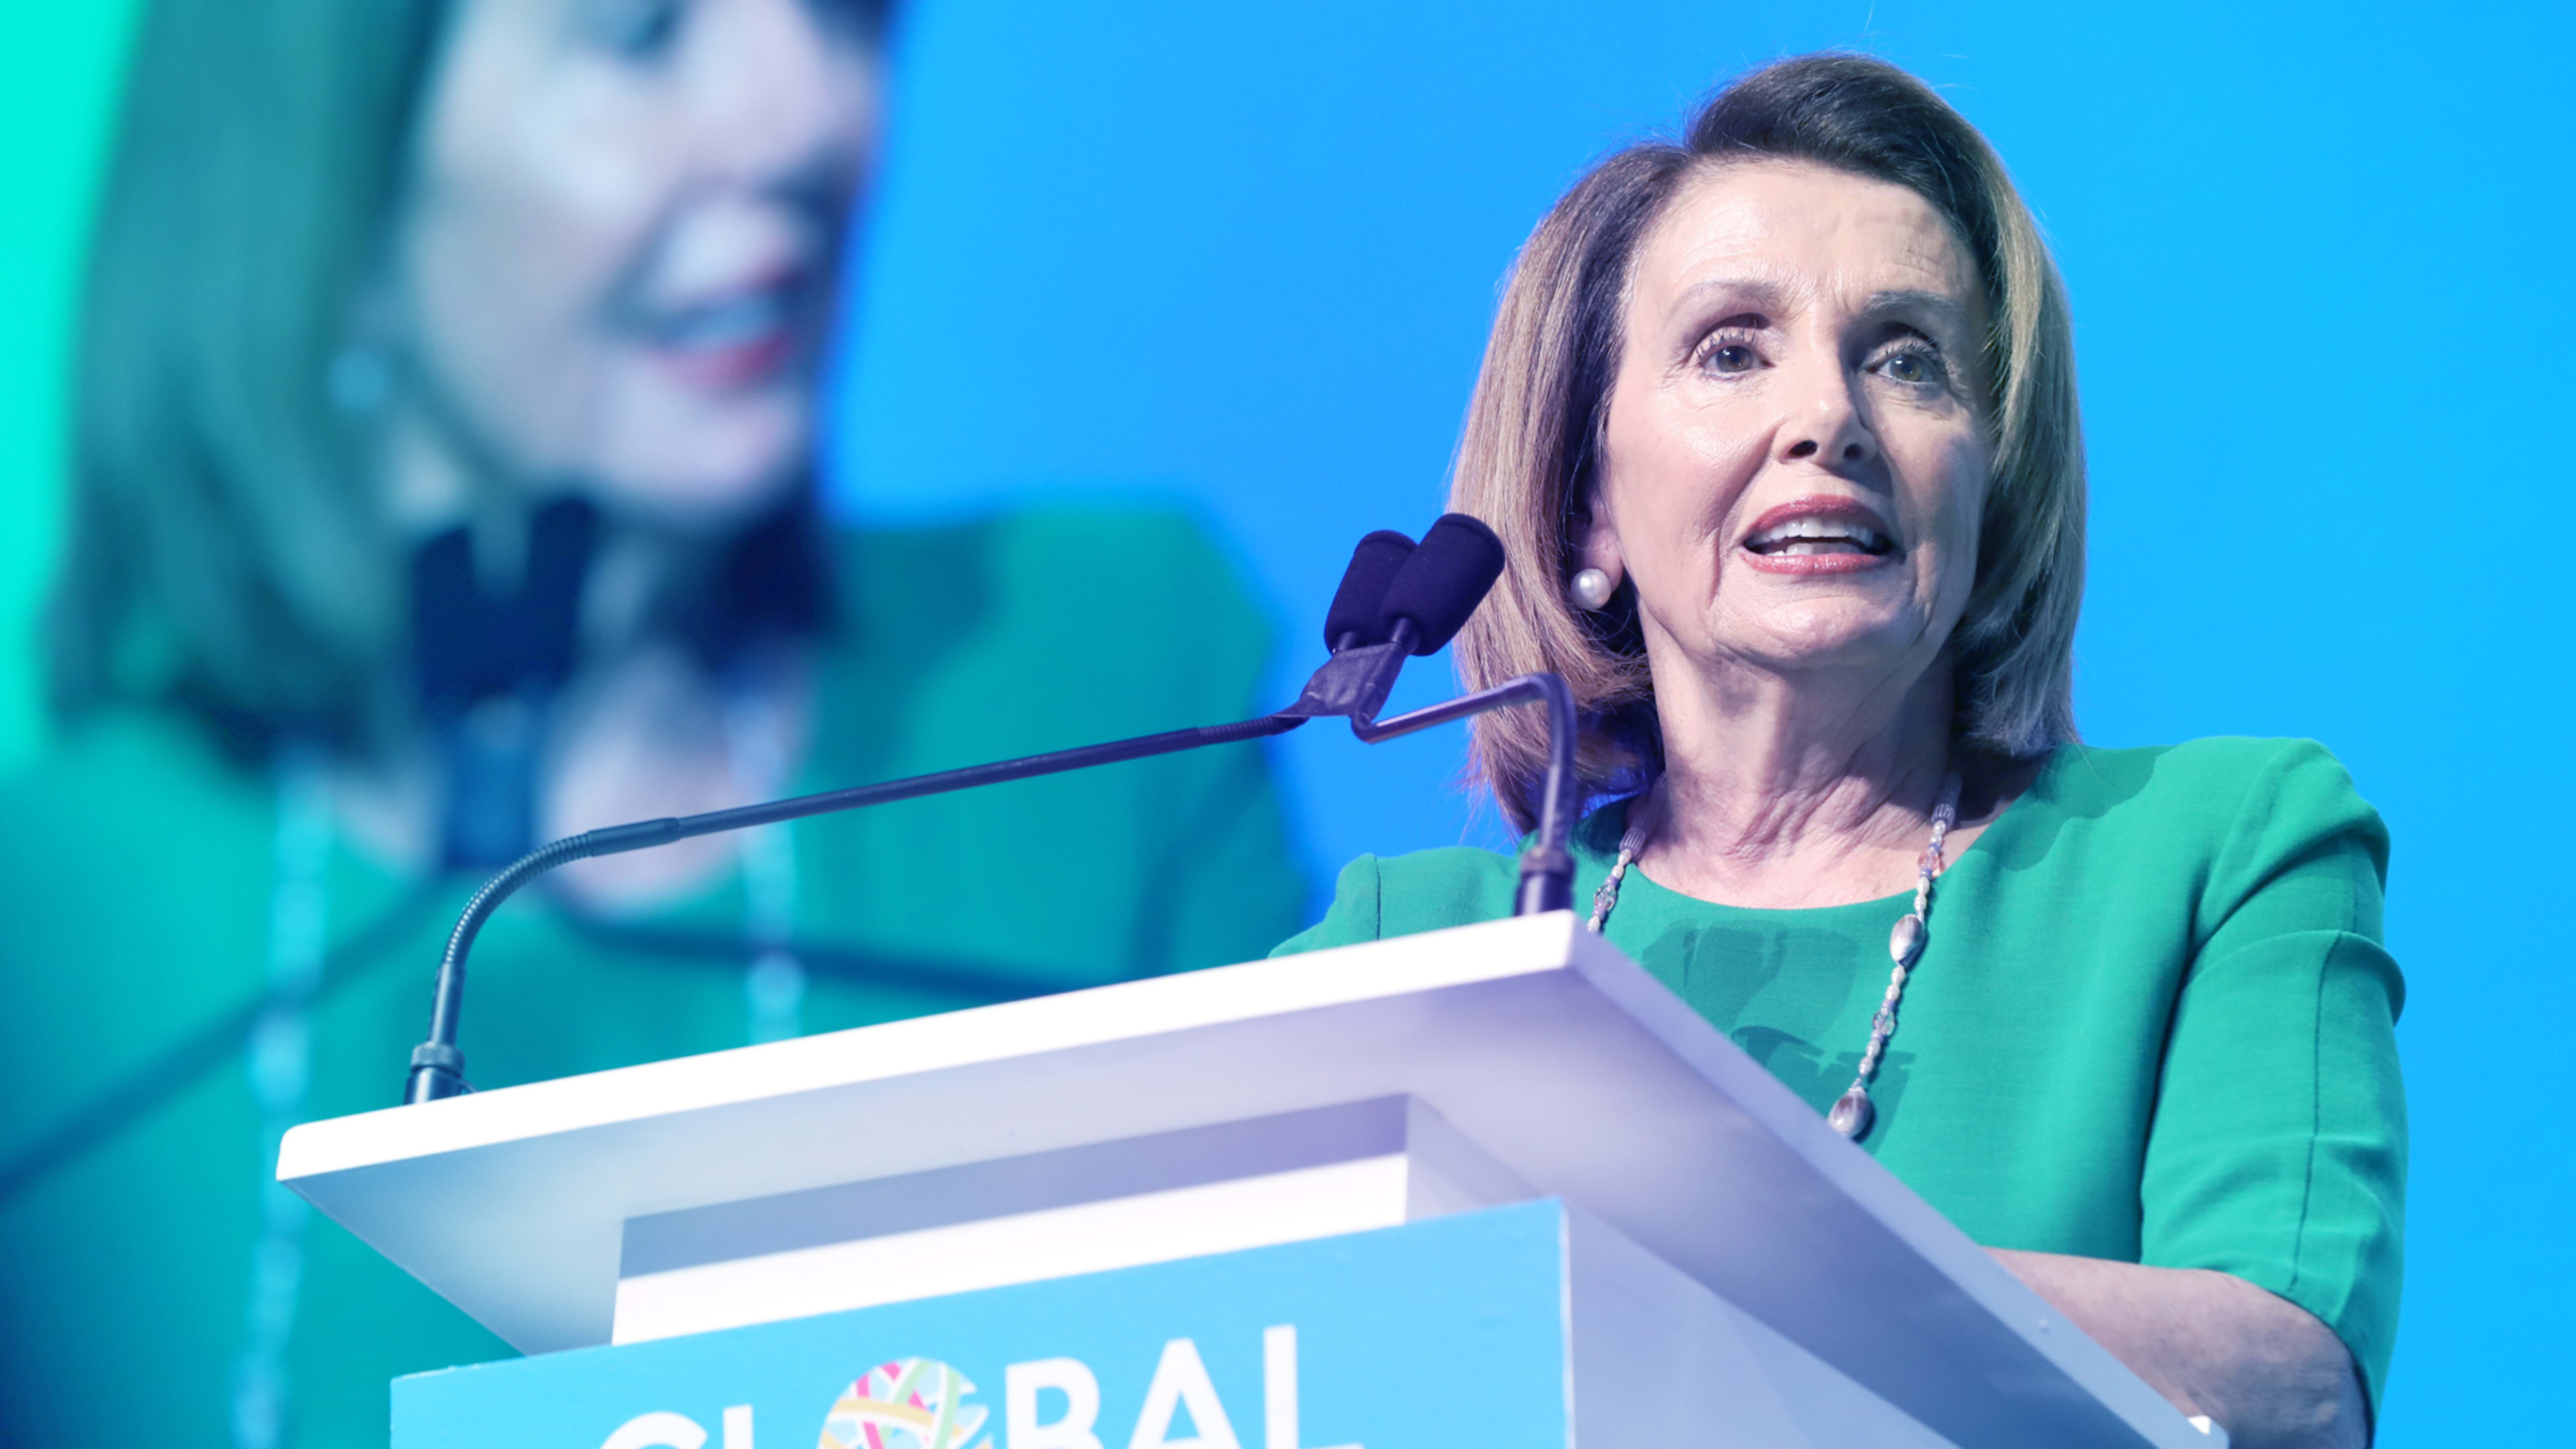 Nancy Pelosi on net neutrality: California will pave the way for a federal law